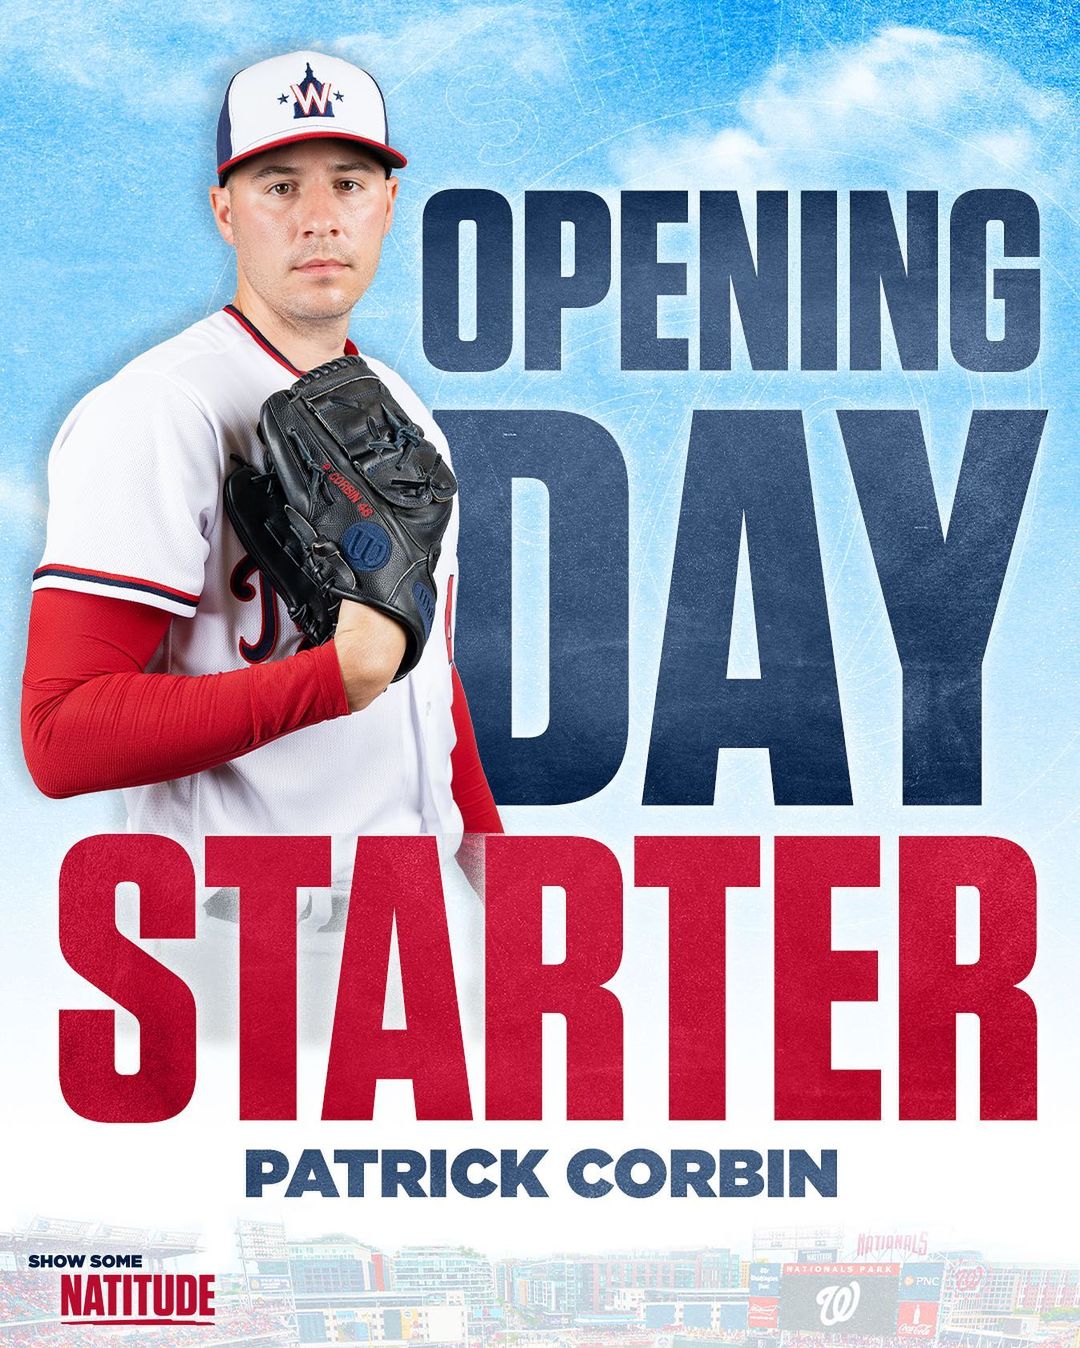 Patrick Corbin will be our Opening Day starter. ...